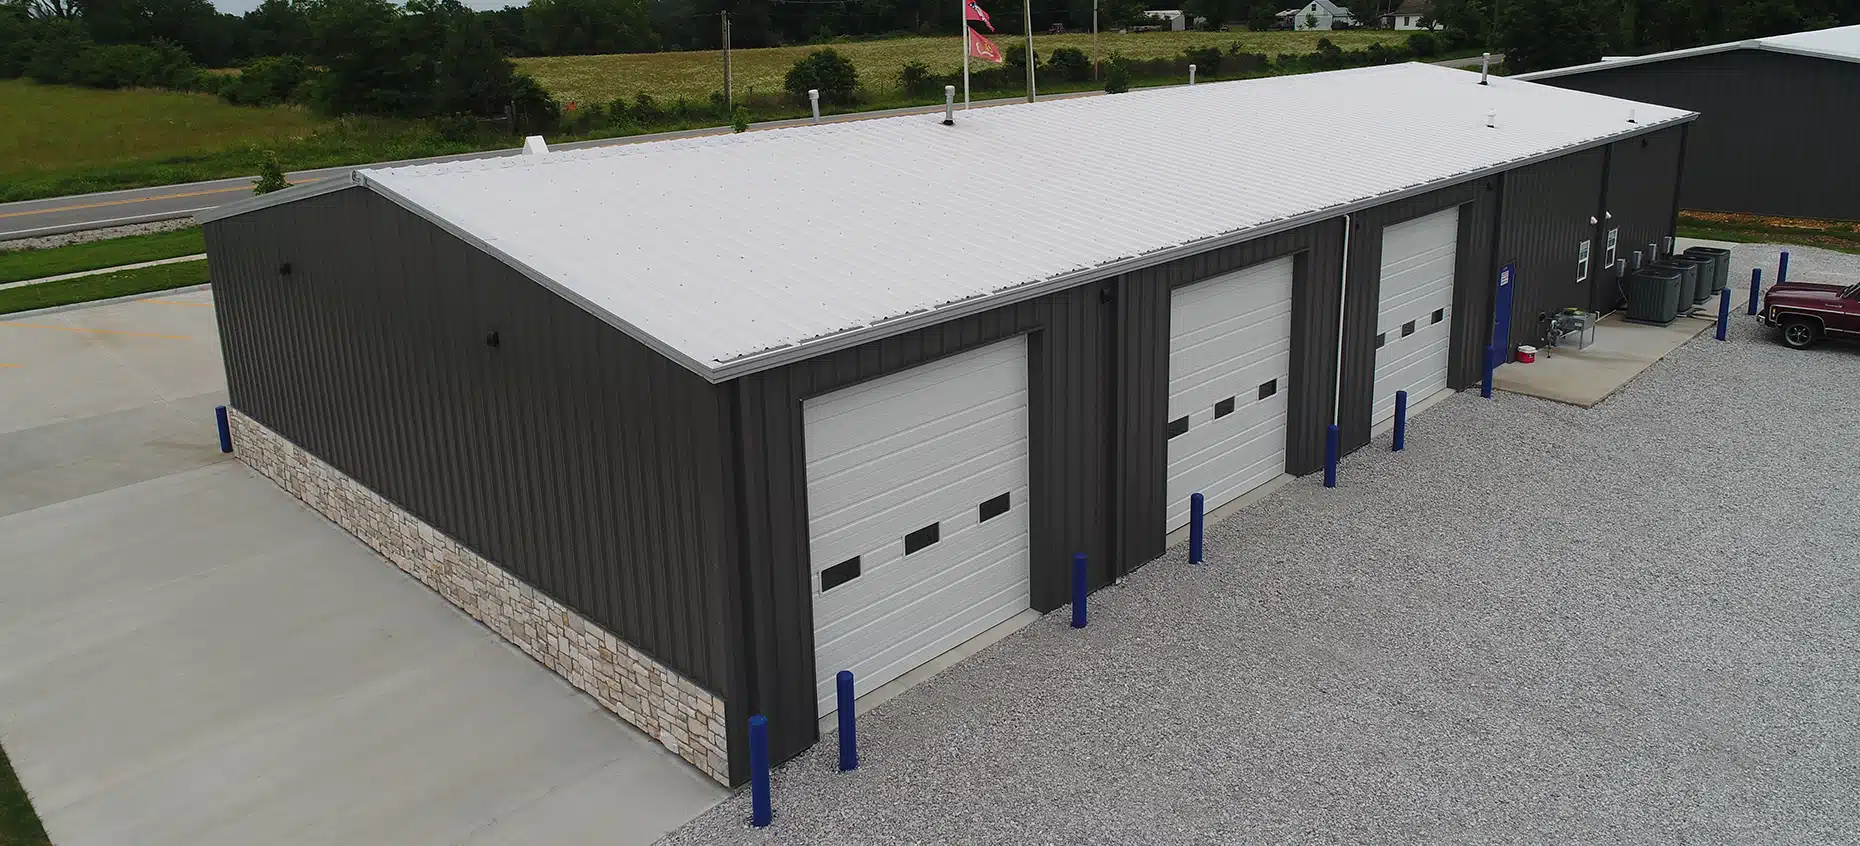 Custom Metal Building using R-Loc Metal with Galvanized Roof and Charcoal Walls